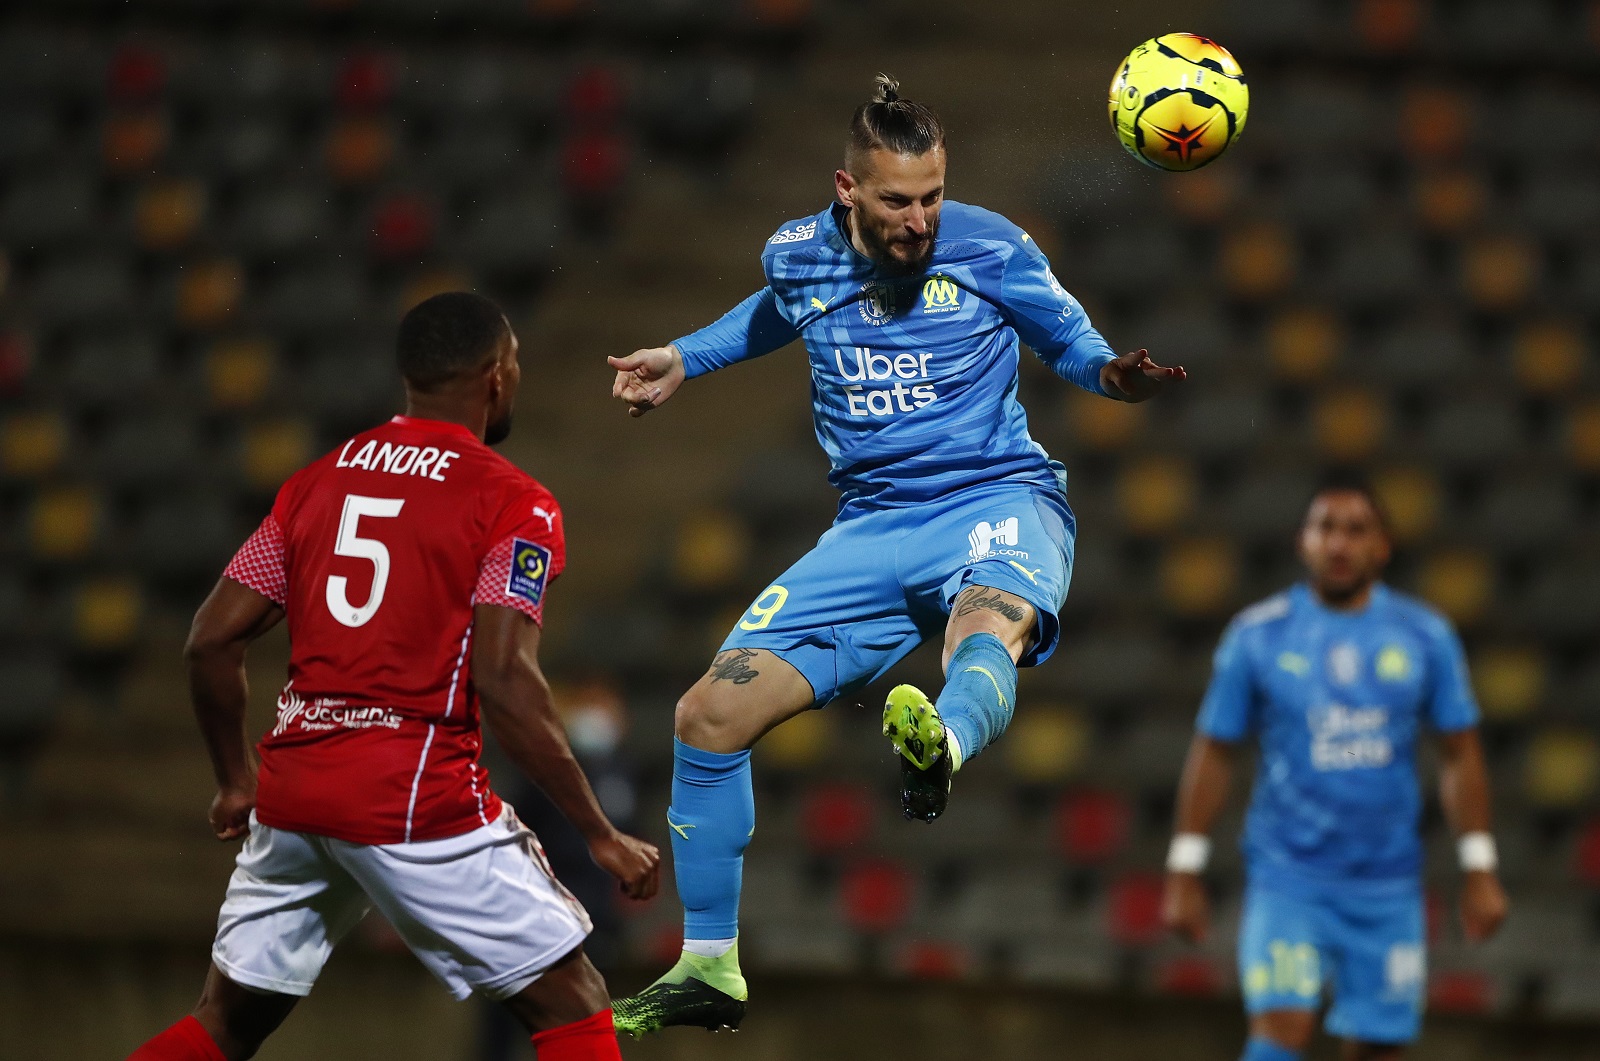 epa08862967 Dario Benedetto (R) of Olympique Marseille and Lucas Deaux (L) of Nimes Olympique in action during the French Ligue 1 soccer match between Nimes Olympique and Olympique Marseille, in Nimes, France, 04 December 2020.  EPA/Guillaume Horcajuelo